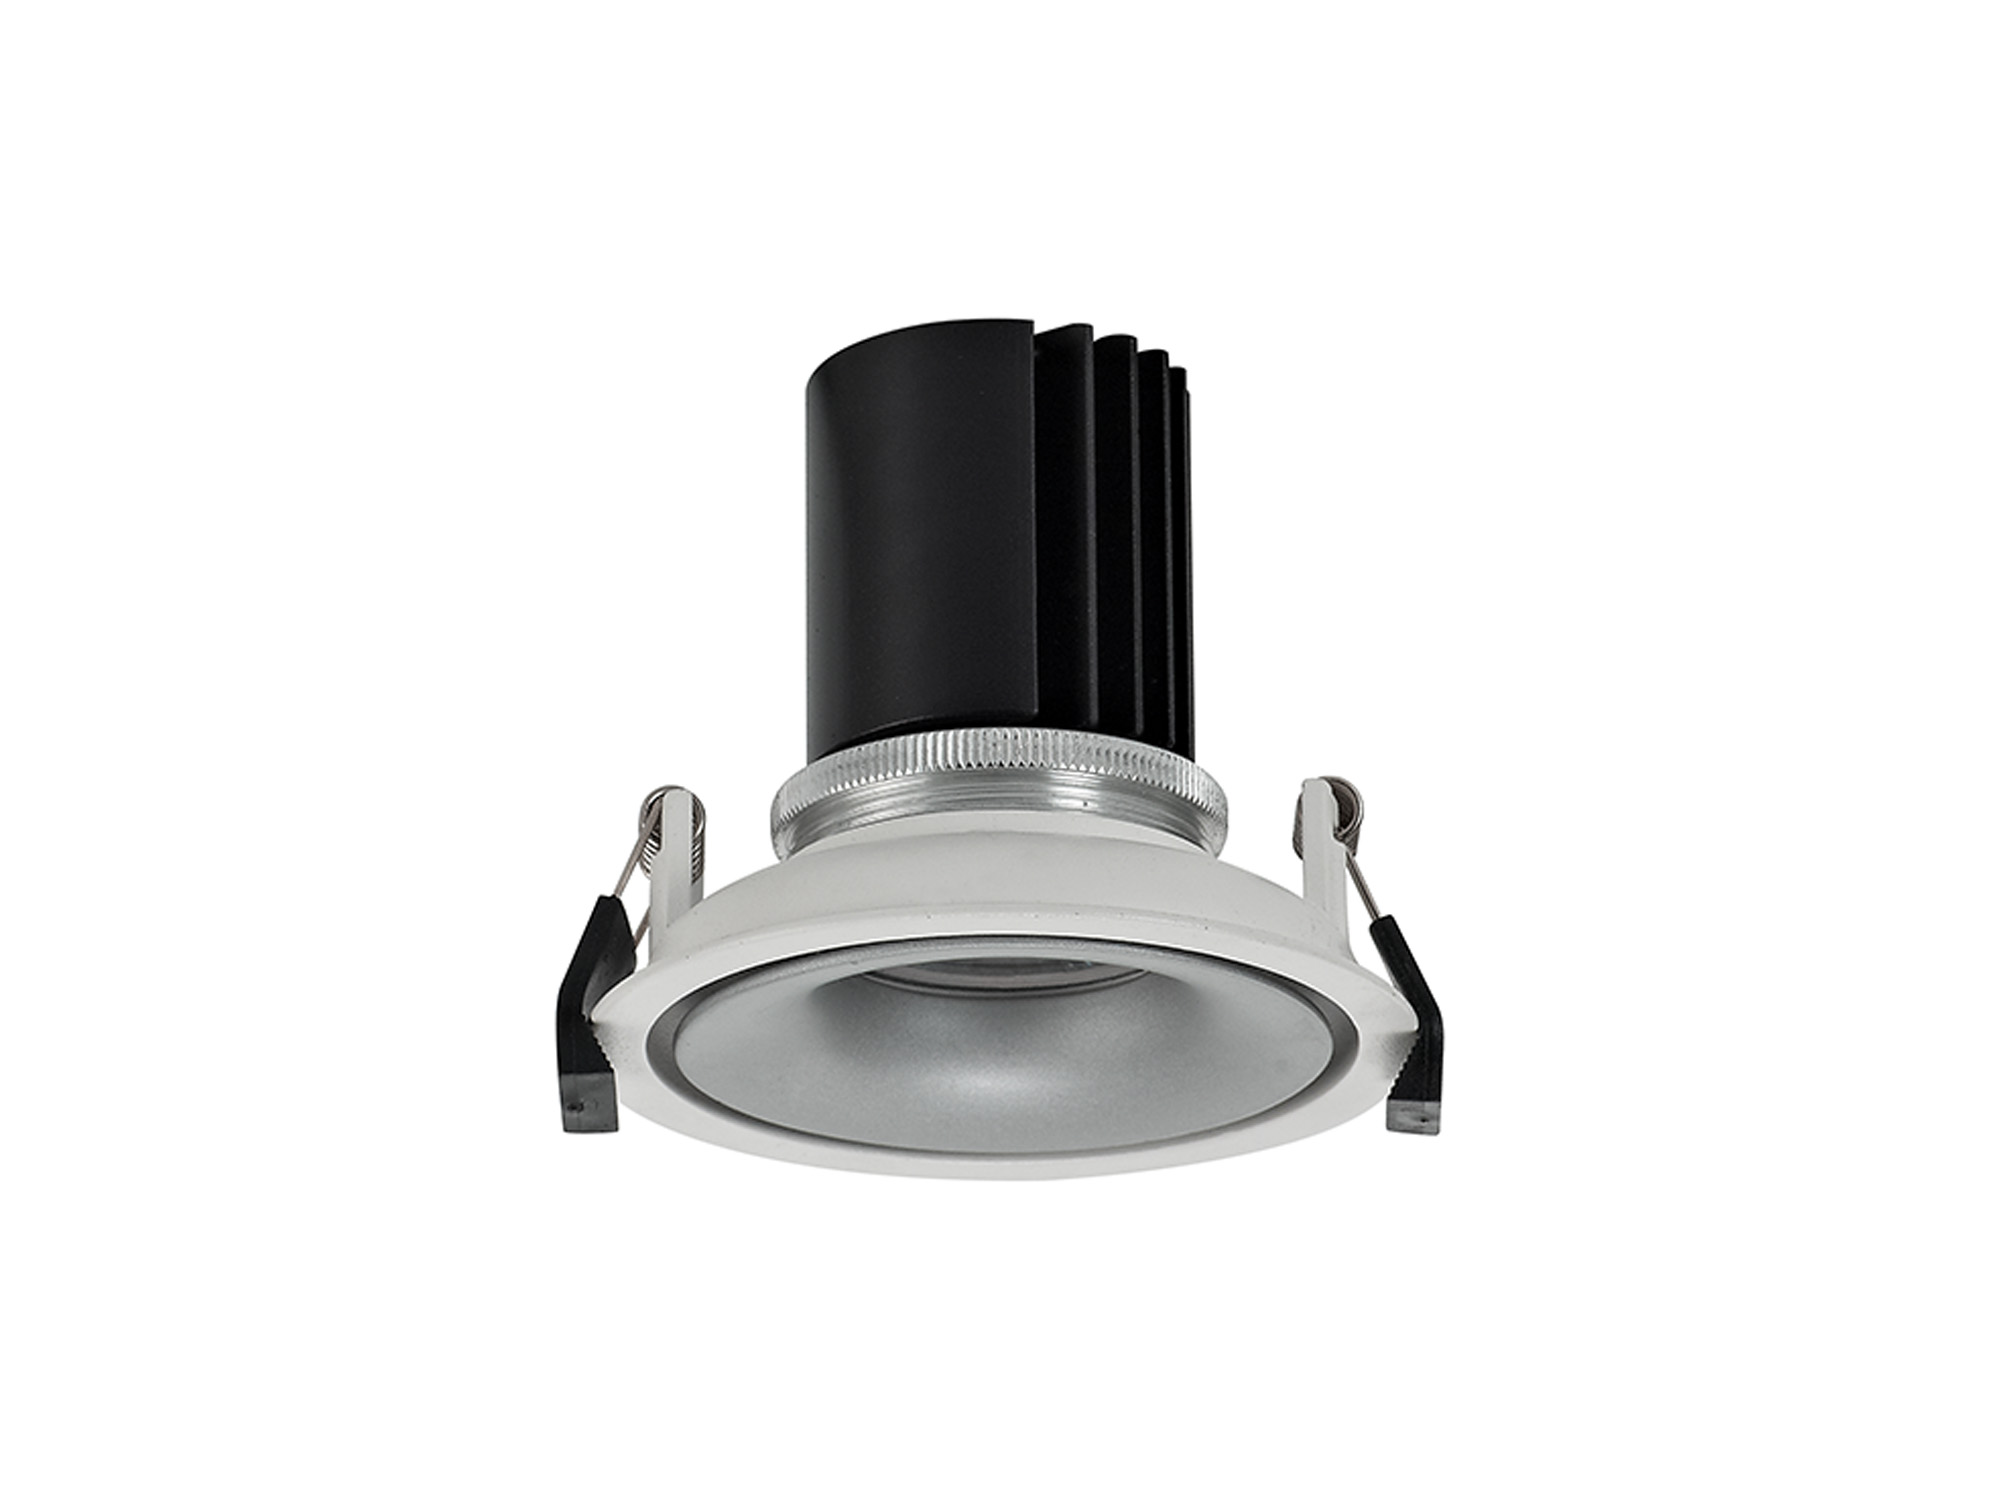 DM202117  Bolor 12 Tridonic Powered 12W 2700K 1200lm 12° CRI>90 LED Engine White/Silver Fixed Recessed Spotlight, IP20